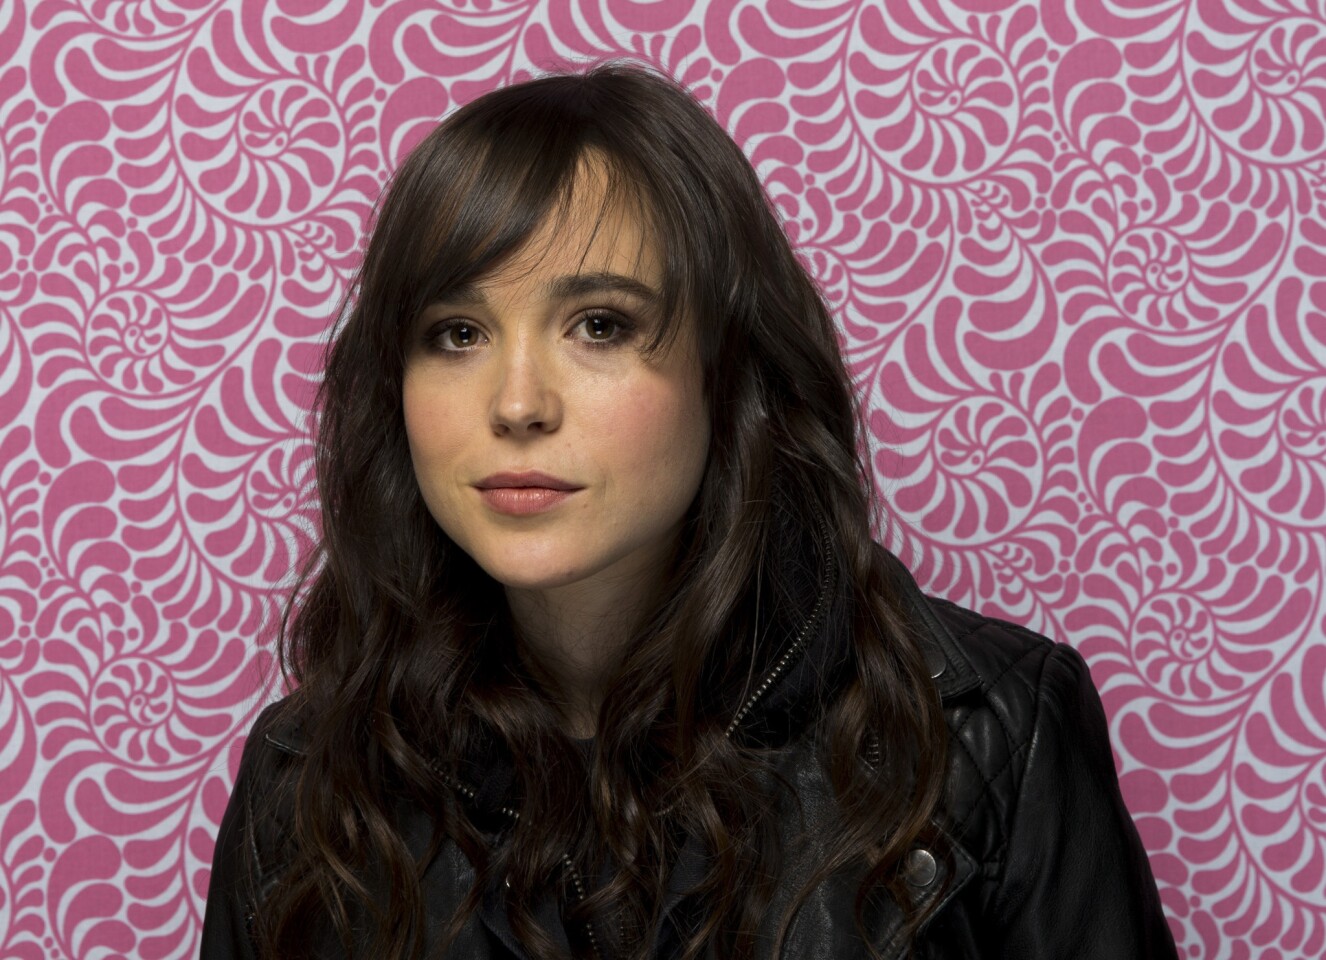 Actress Ellen Page came out at Time to Thrive, an LGBT youth conference. "I'm tired of hiding," she said onstage. "I'm tired of lying by omission."